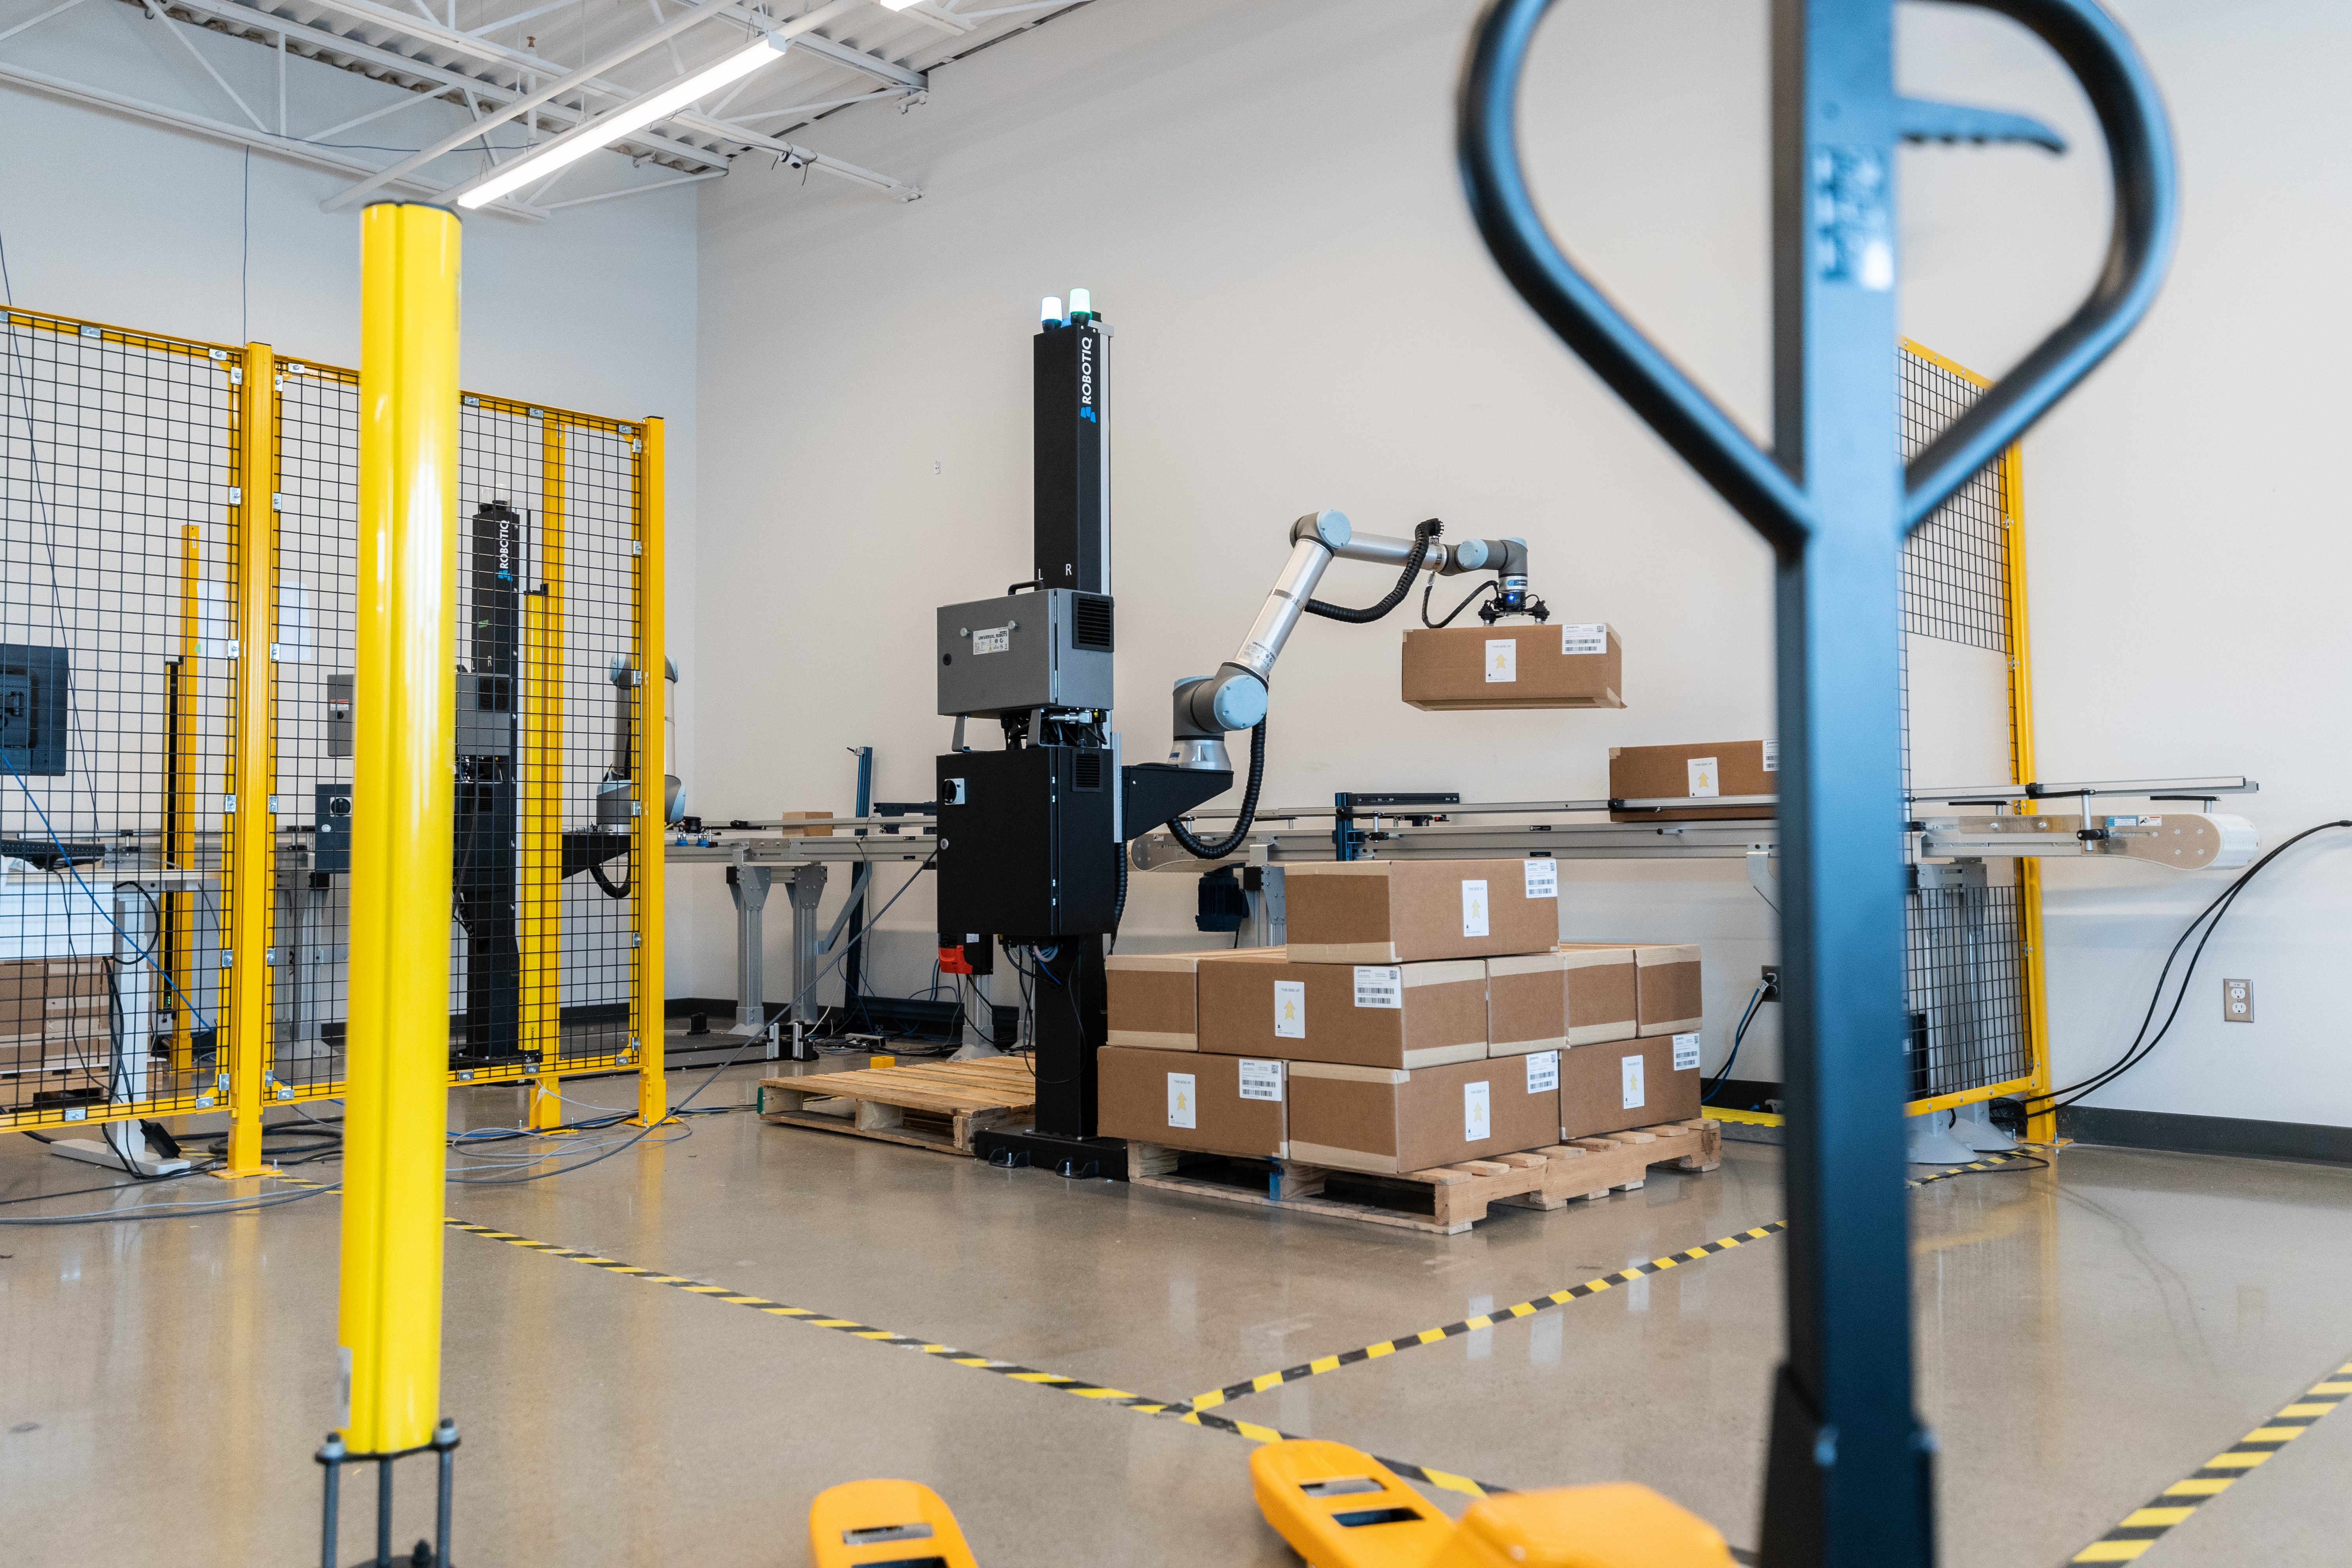 Packaging in Logistics: How to Streamline Packaging With Cobots